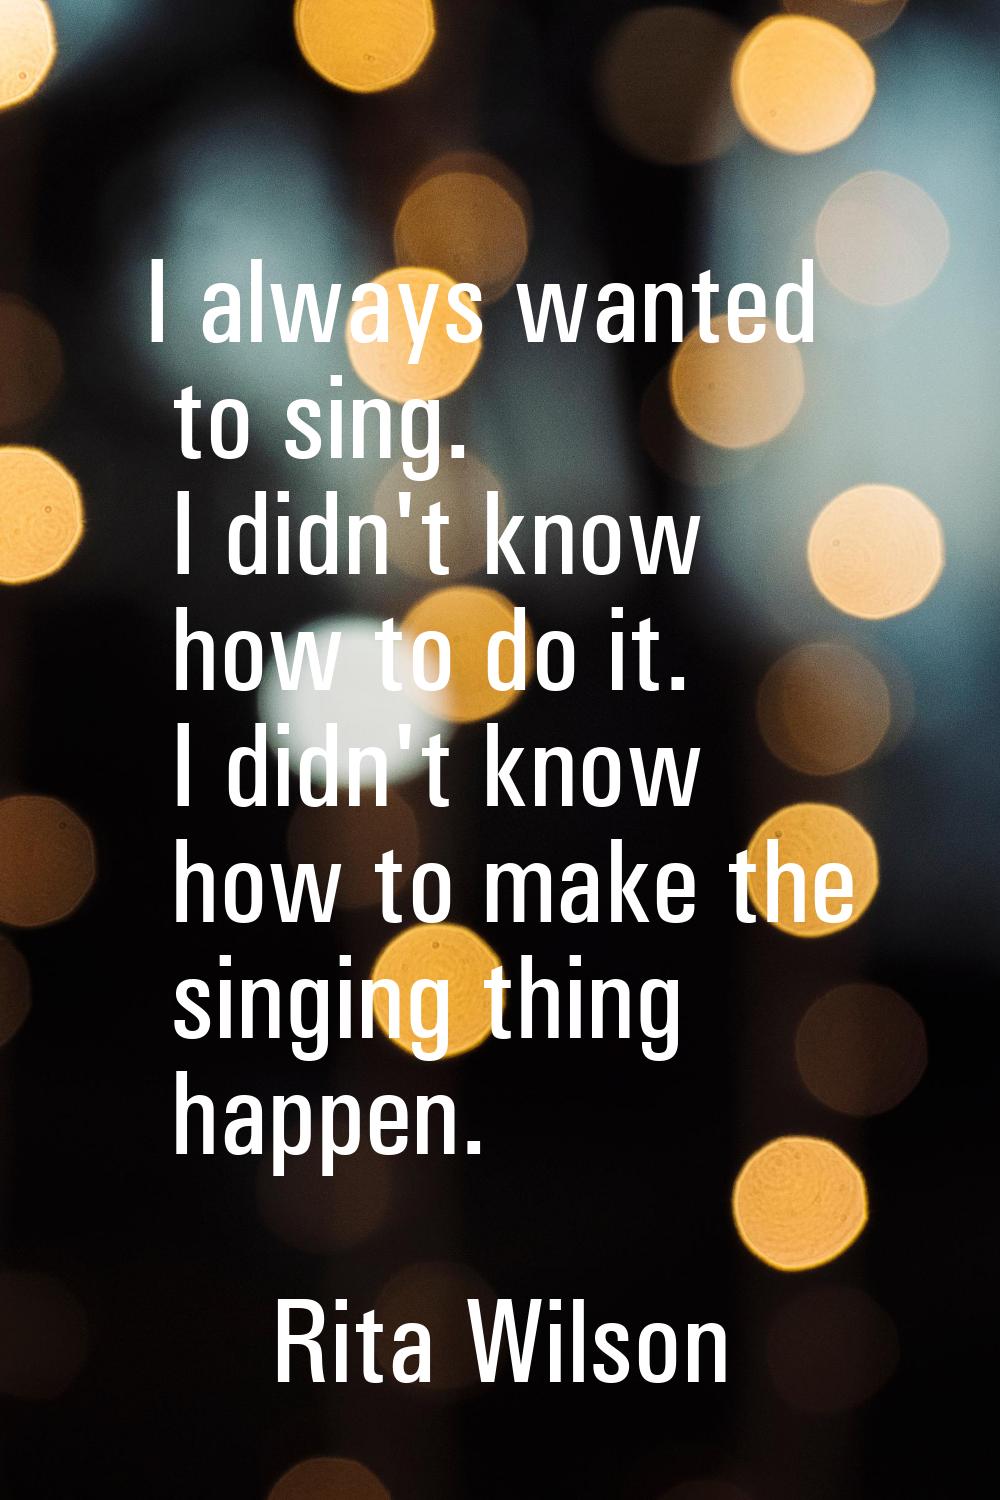 I always wanted to sing. I didn't know how to do it. I didn't know how to make the singing thing ha